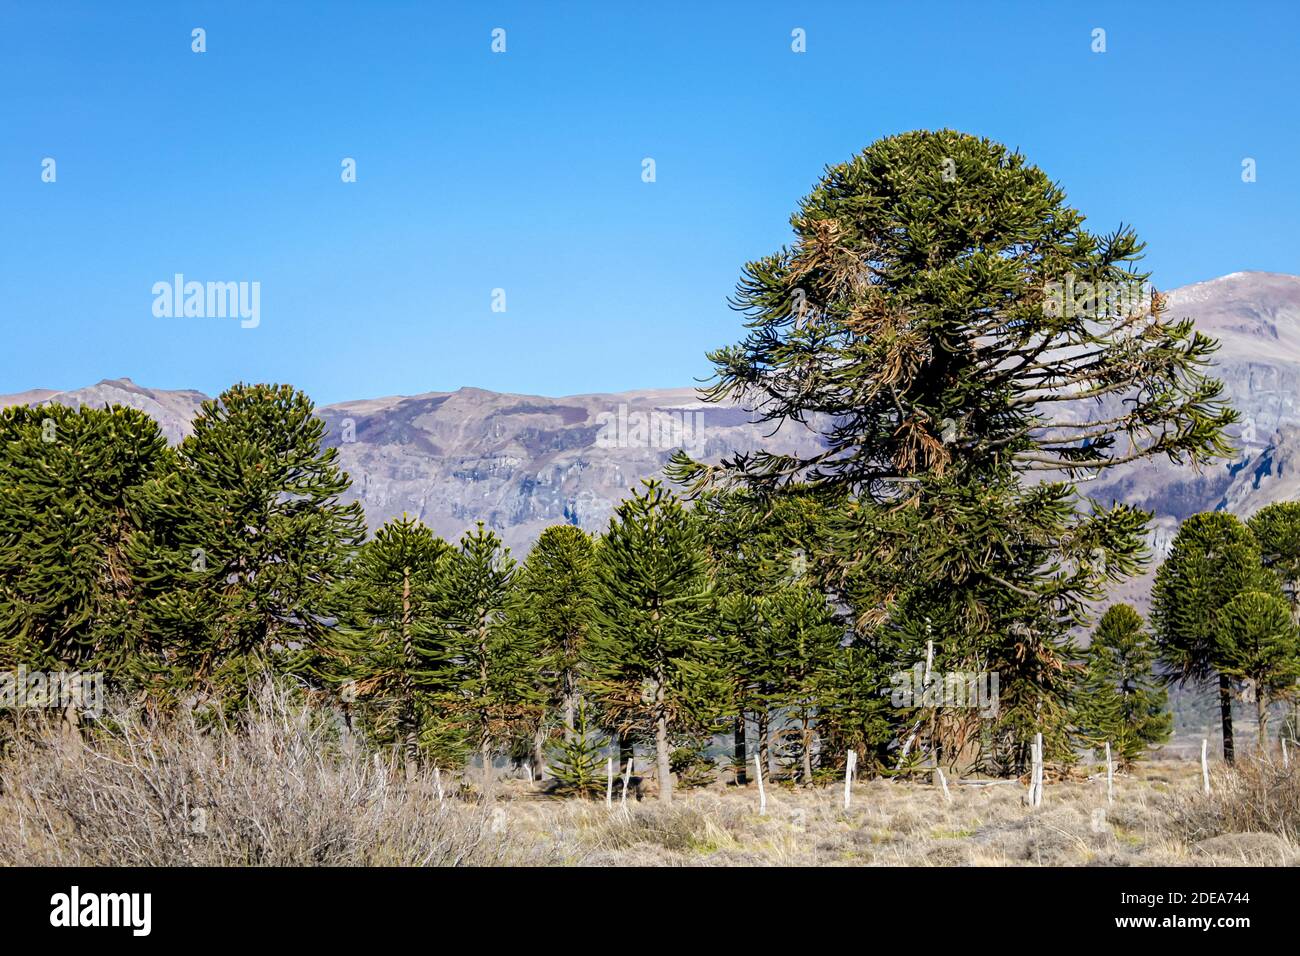 Araucaria forest in the central and northern region of the Neuquen province in Argentine. Stock Photo